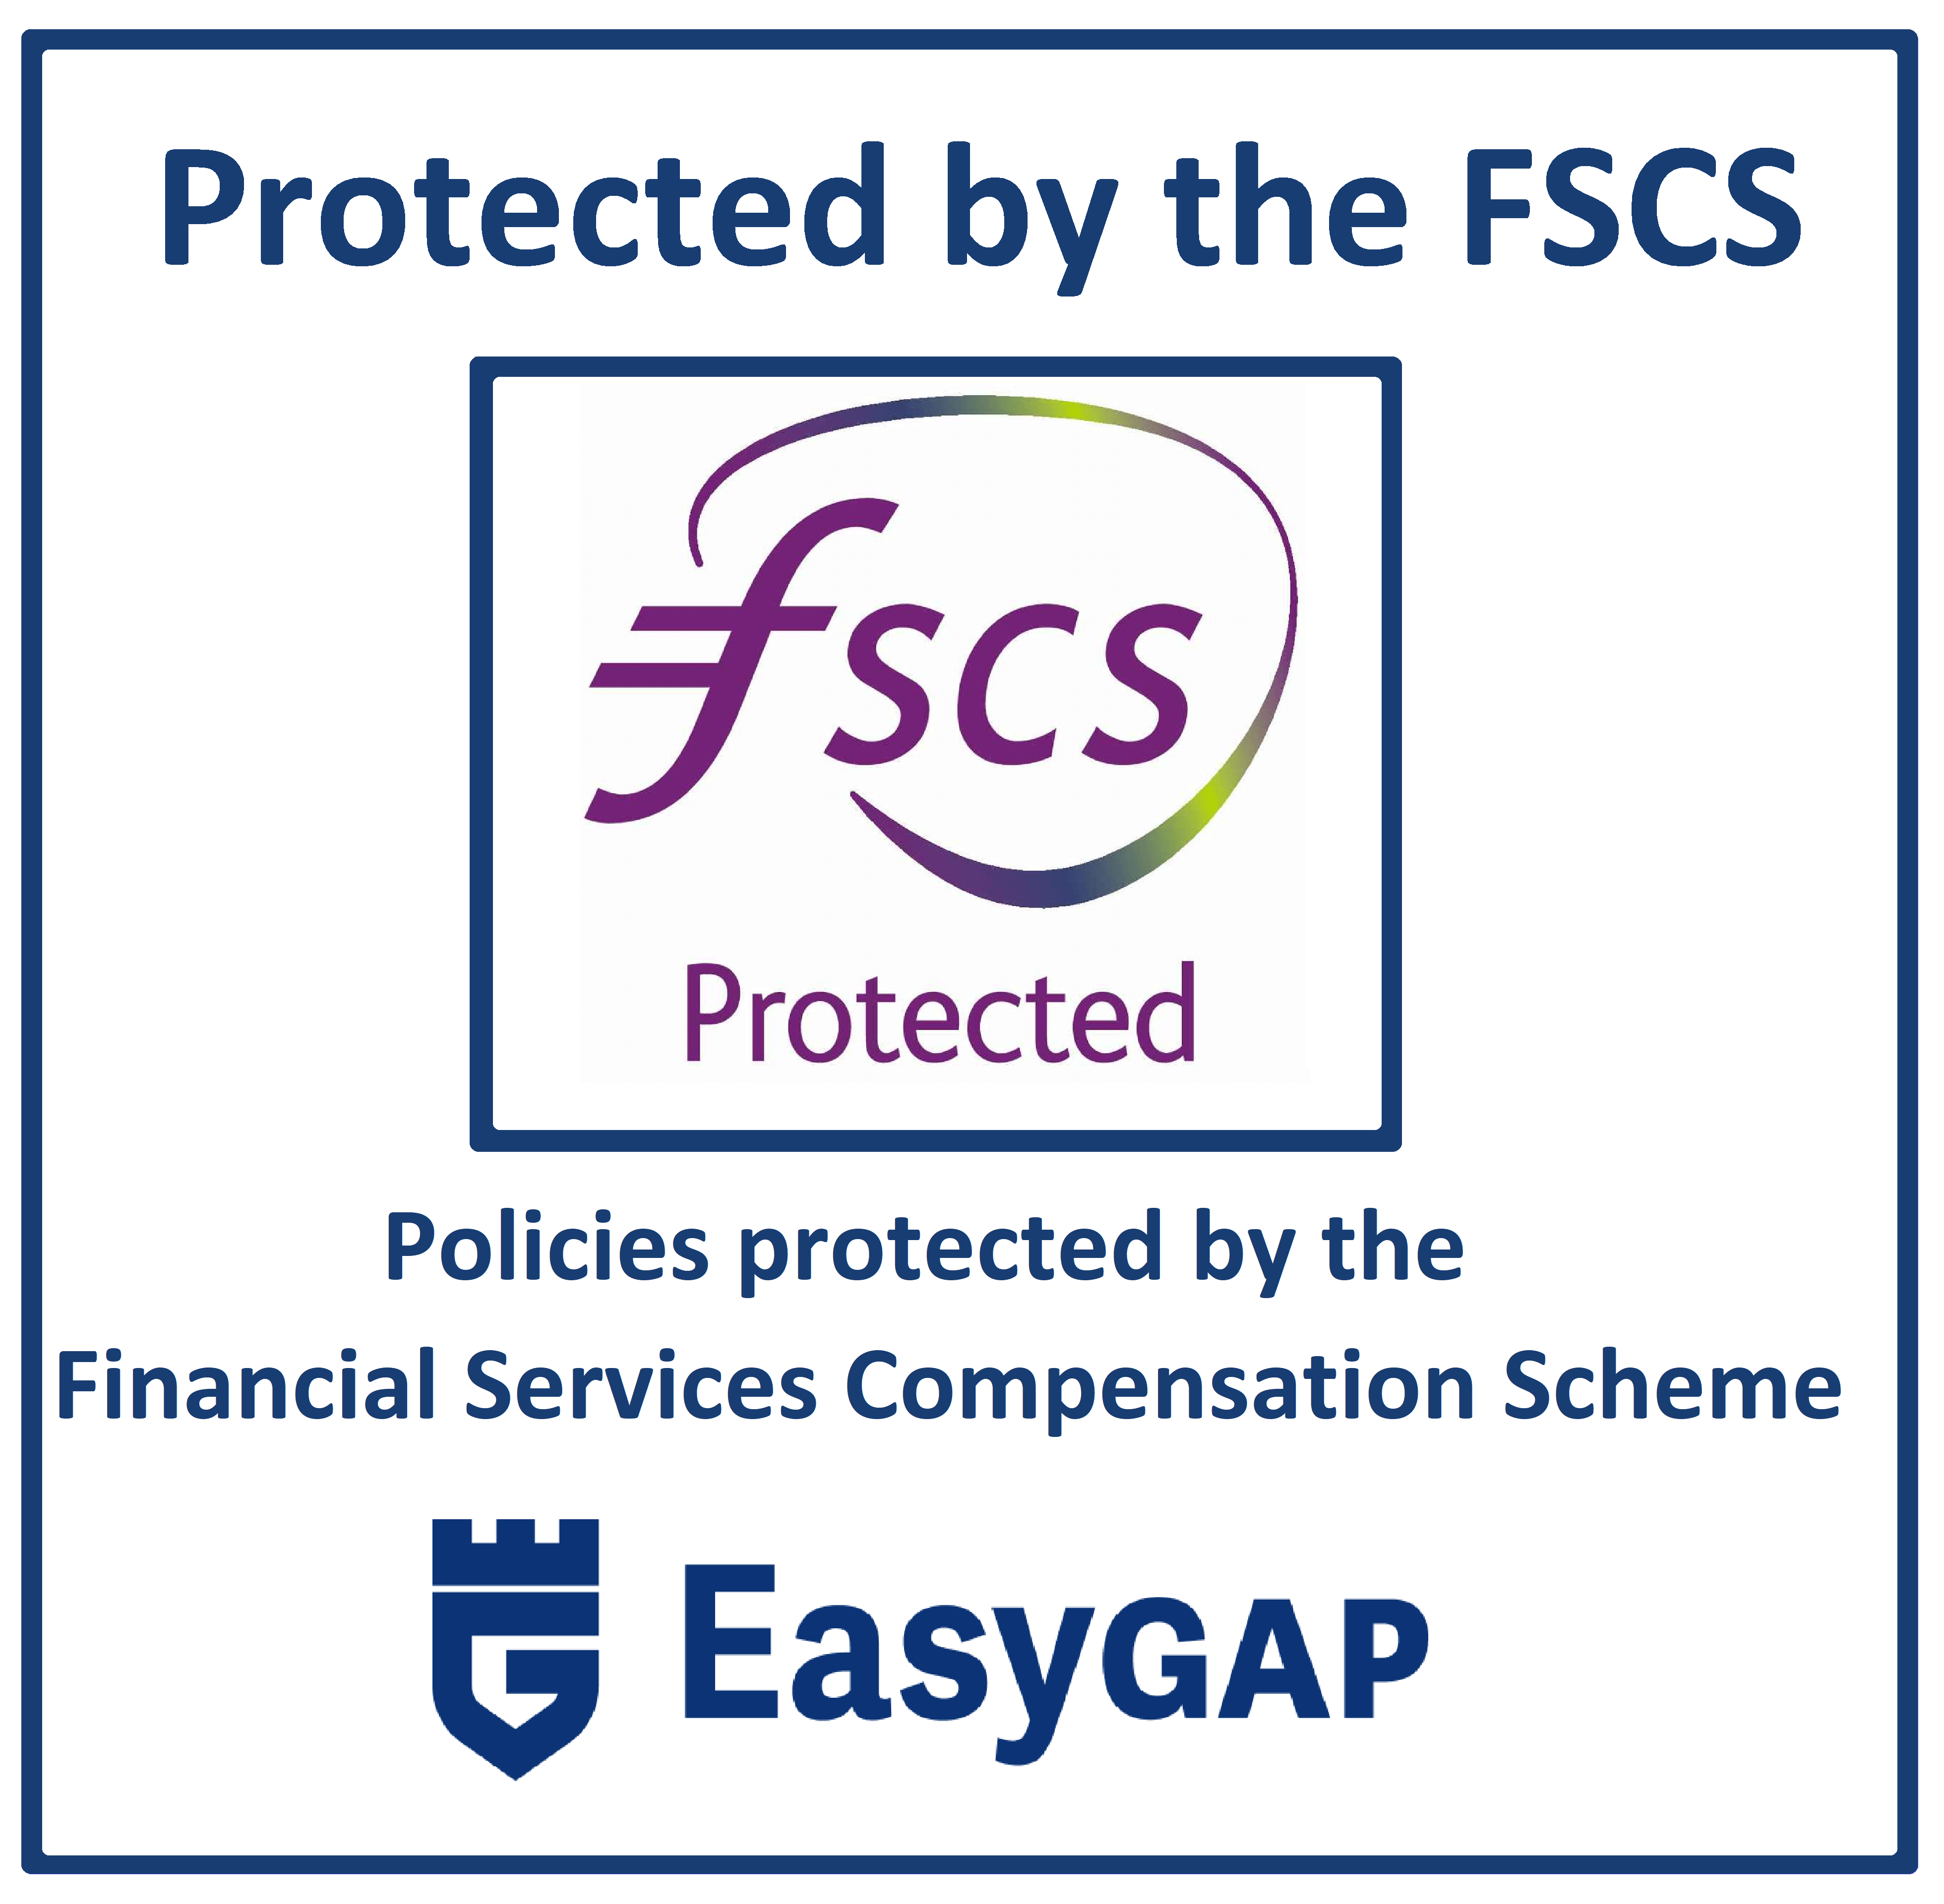 Your Easy Gap Excess Policy is protected by the FSCS